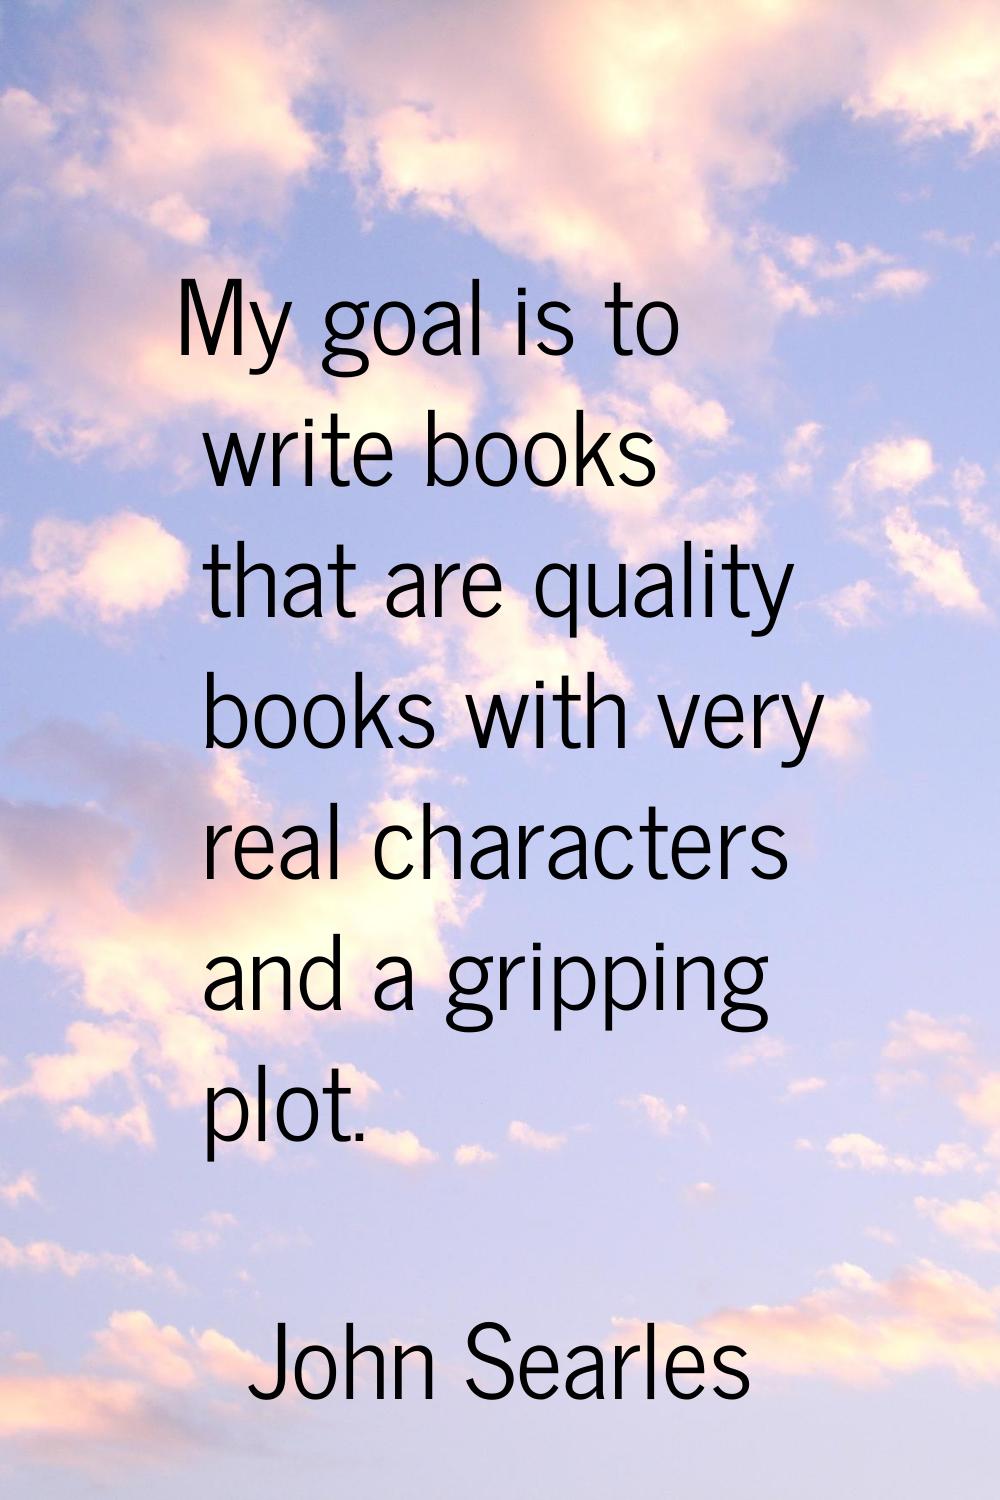 My goal is to write books that are quality books with very real characters and a gripping plot.